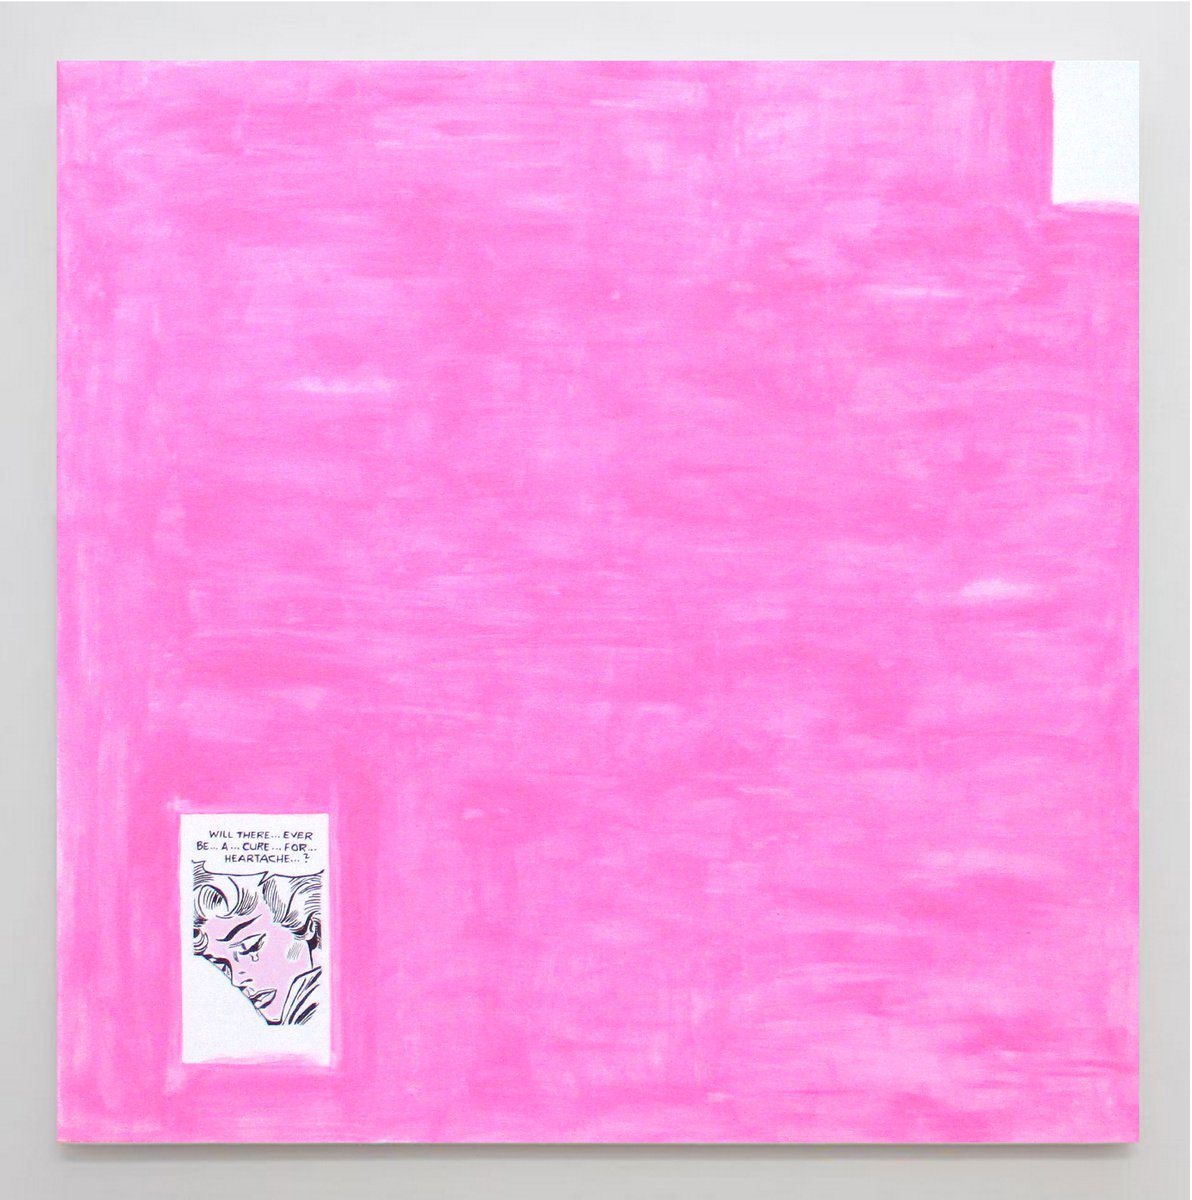 Slave to Love (Pop art abstract pink) by SUPER POP BOY